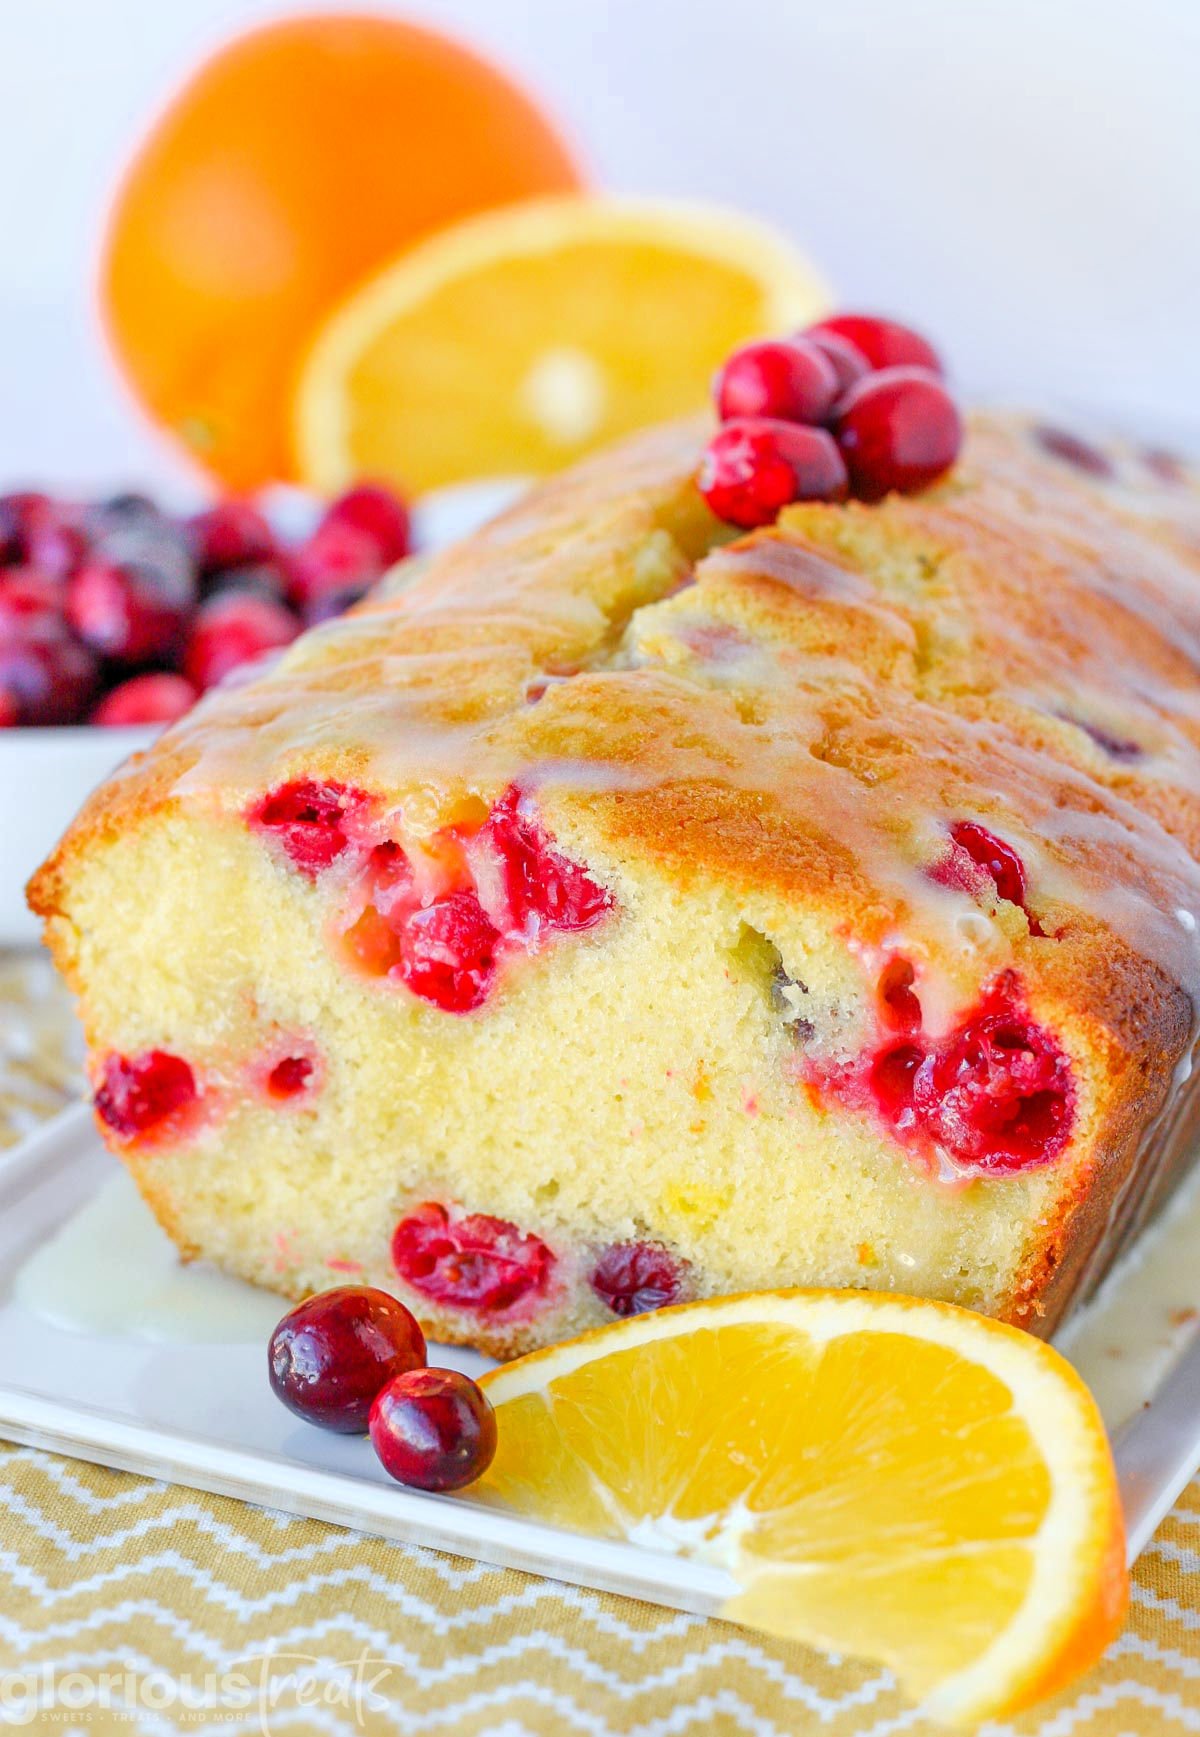 cranberry orange bread sitting on white tray with slices of oranges around the bread and fresh cranberries on the top.